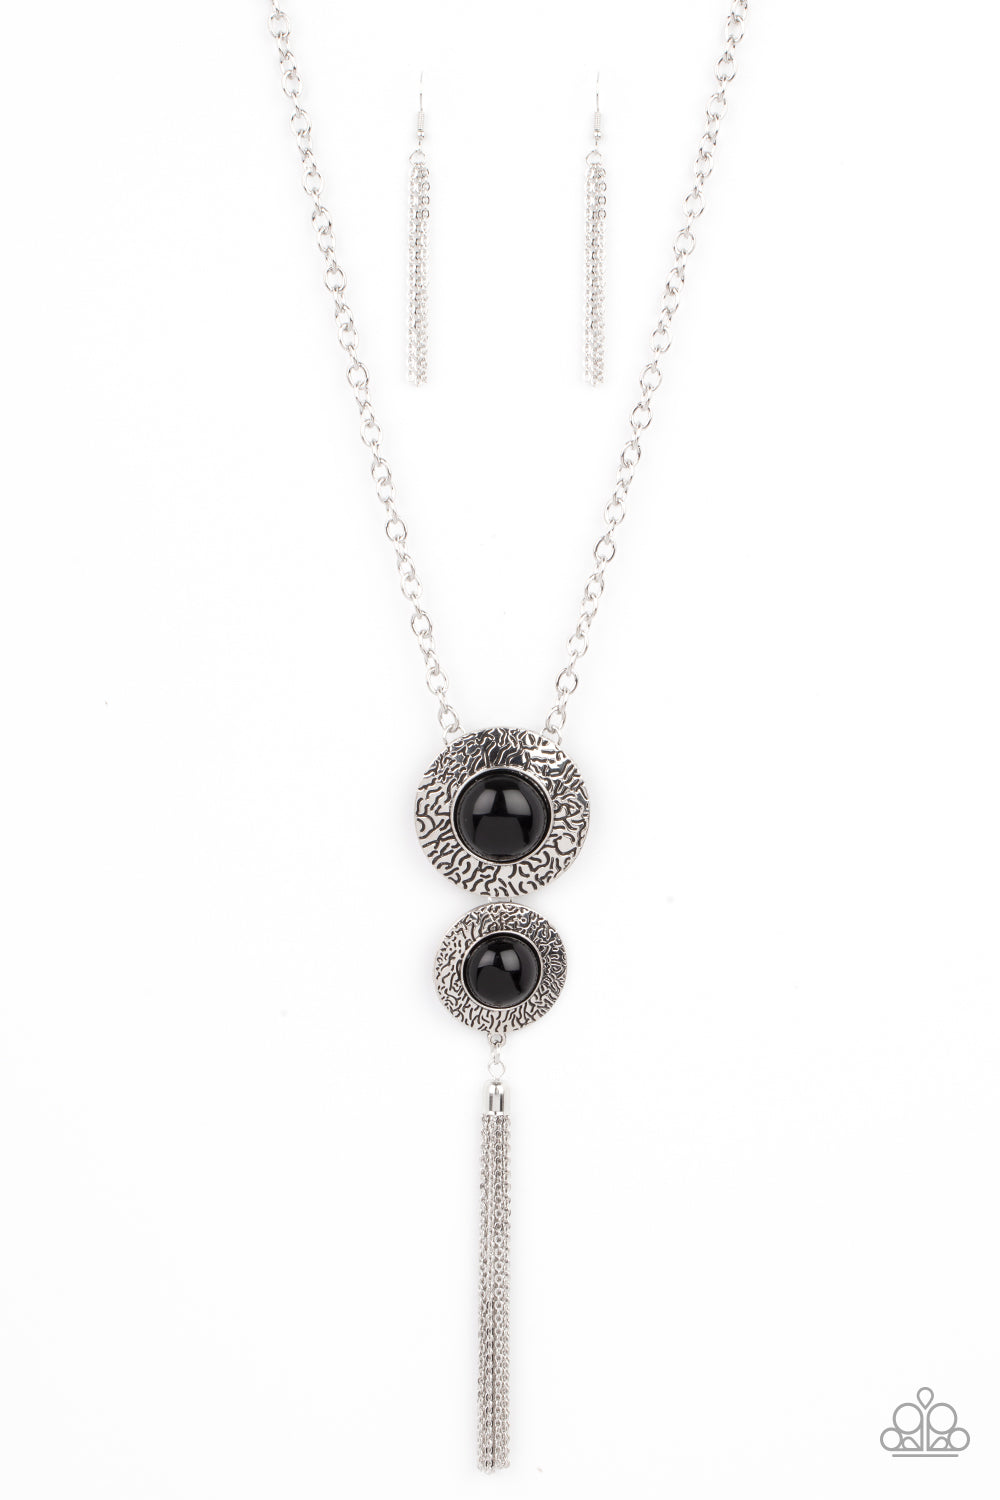 Paparazzi Necklaces - Abstract Artistry - Black